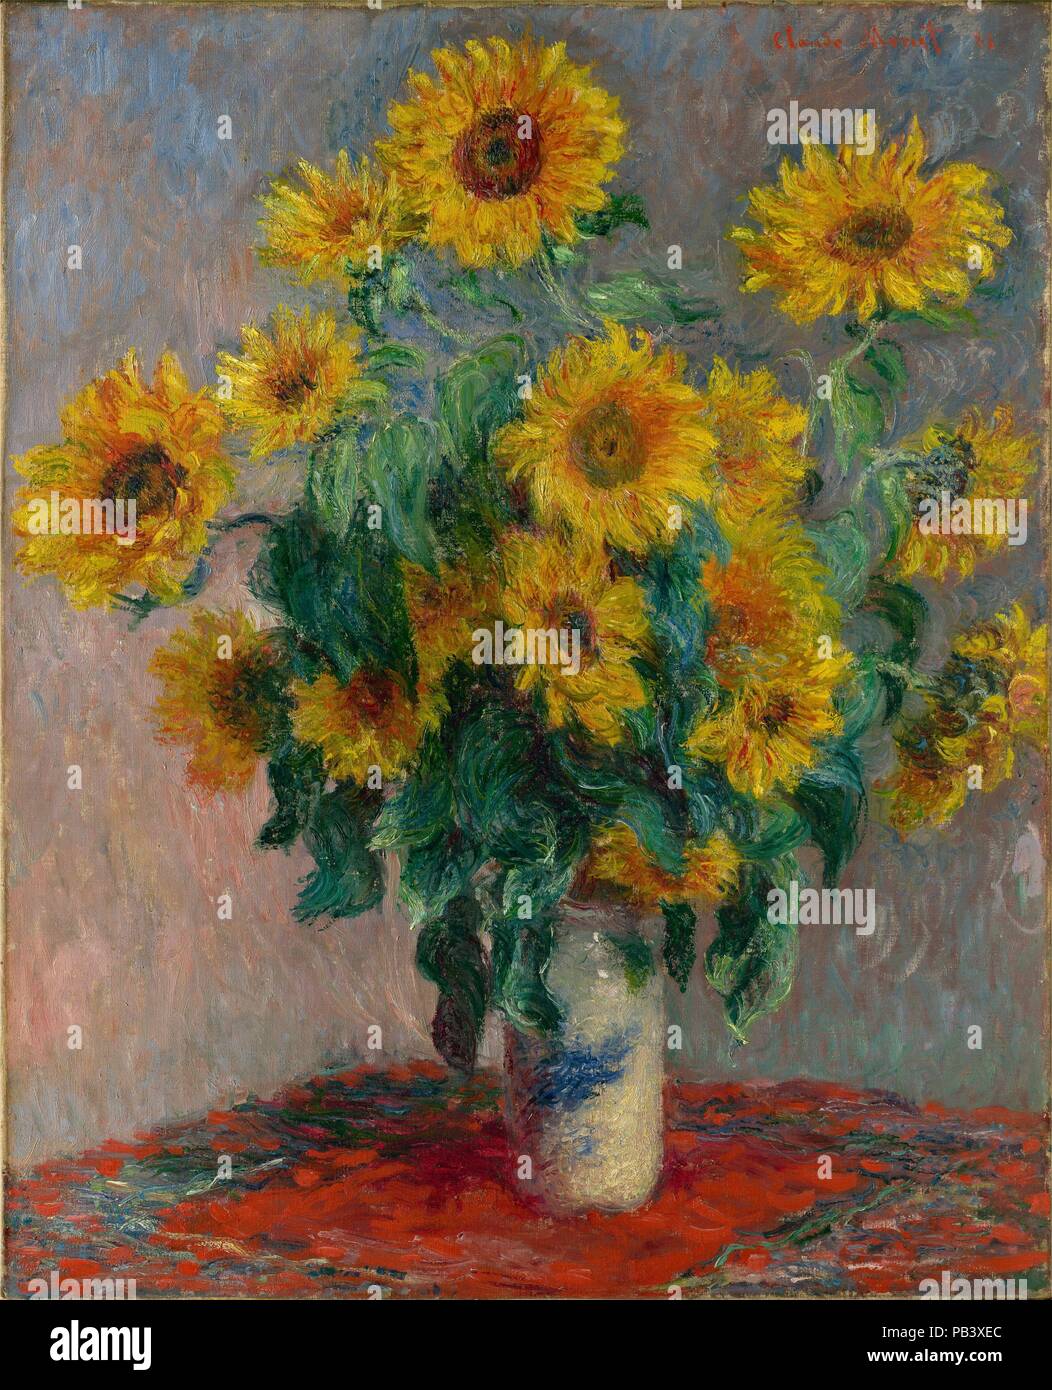 Bouquet of Sunflowers. Artist: Claude Monet (French, Paris 1840-1926 Giverny). Dimensions: 39 3/4 x 32 in. (101 x 81.3 cm). Date: 1881.  In November 1888, Van Gogh wrote: 'Gauguin was telling me the other day--that he'd seen a painting by Claude Monet of sunflowers in a large Japanese vase, very fine. But--he likes mine better. I'm not of that opinion.' Critics had earlier praised the 'brio and daring' of Monet's technique when he showed this still life, depicting sunflowers that grew along the pathway to his garden at Vétheuil, at the 1882 Impressionist exhibition. Artwork also known as: LOS  Stock Photo